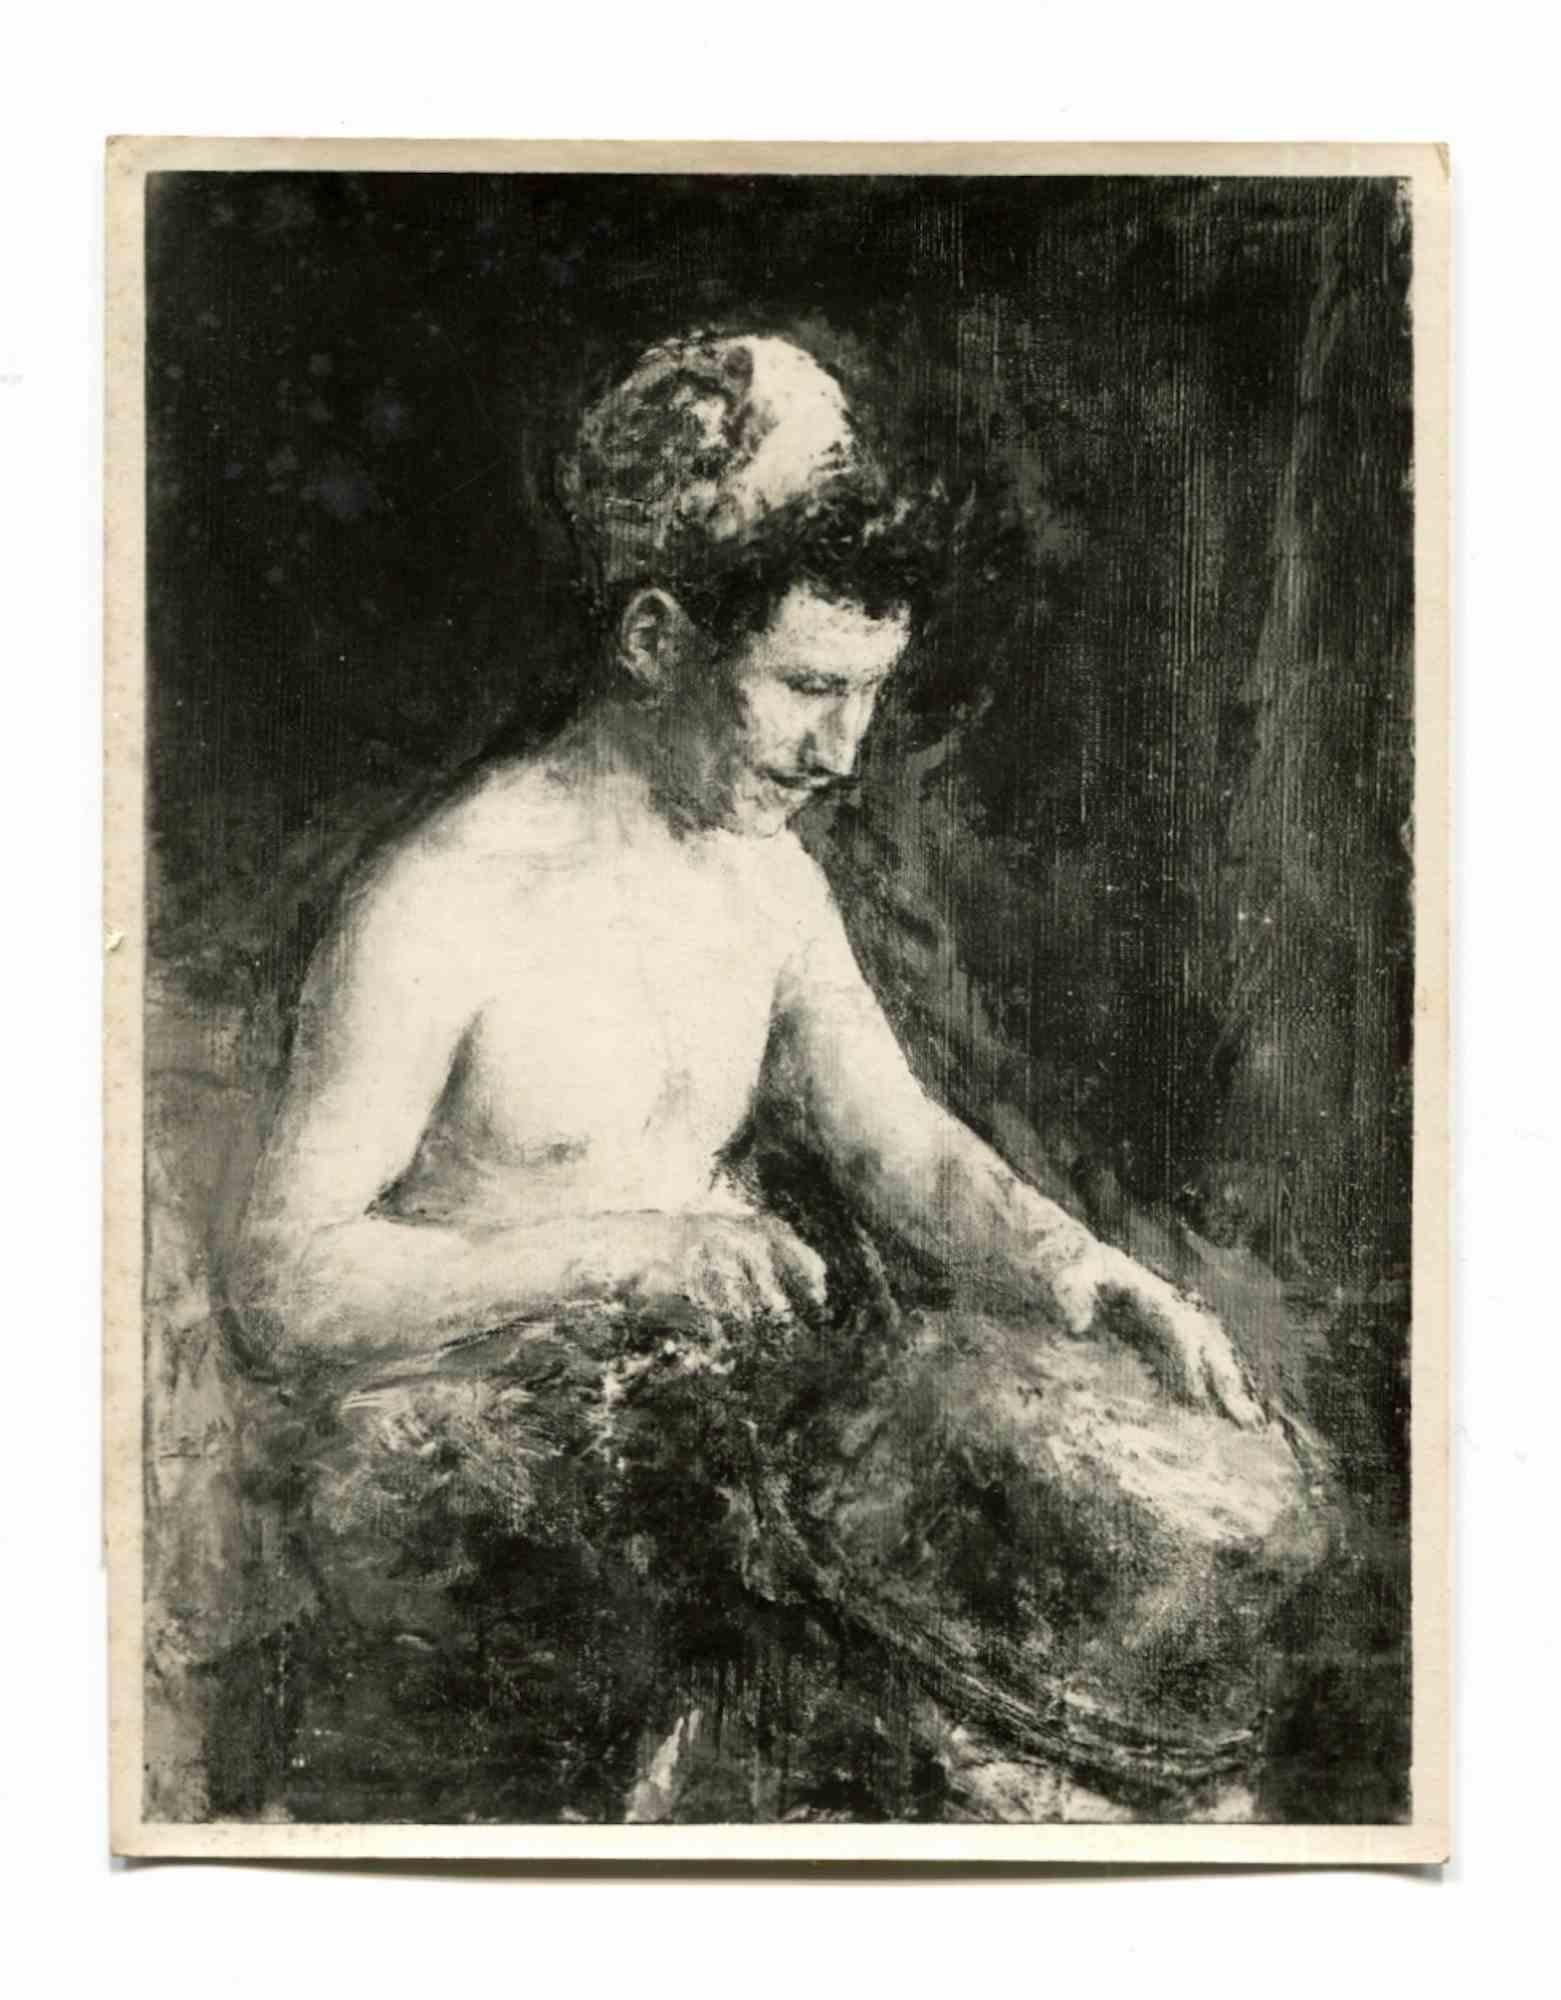 Unknown Figurative Photograph - Vintage Photo of Painting - Vintage Photo - Early 20th Century